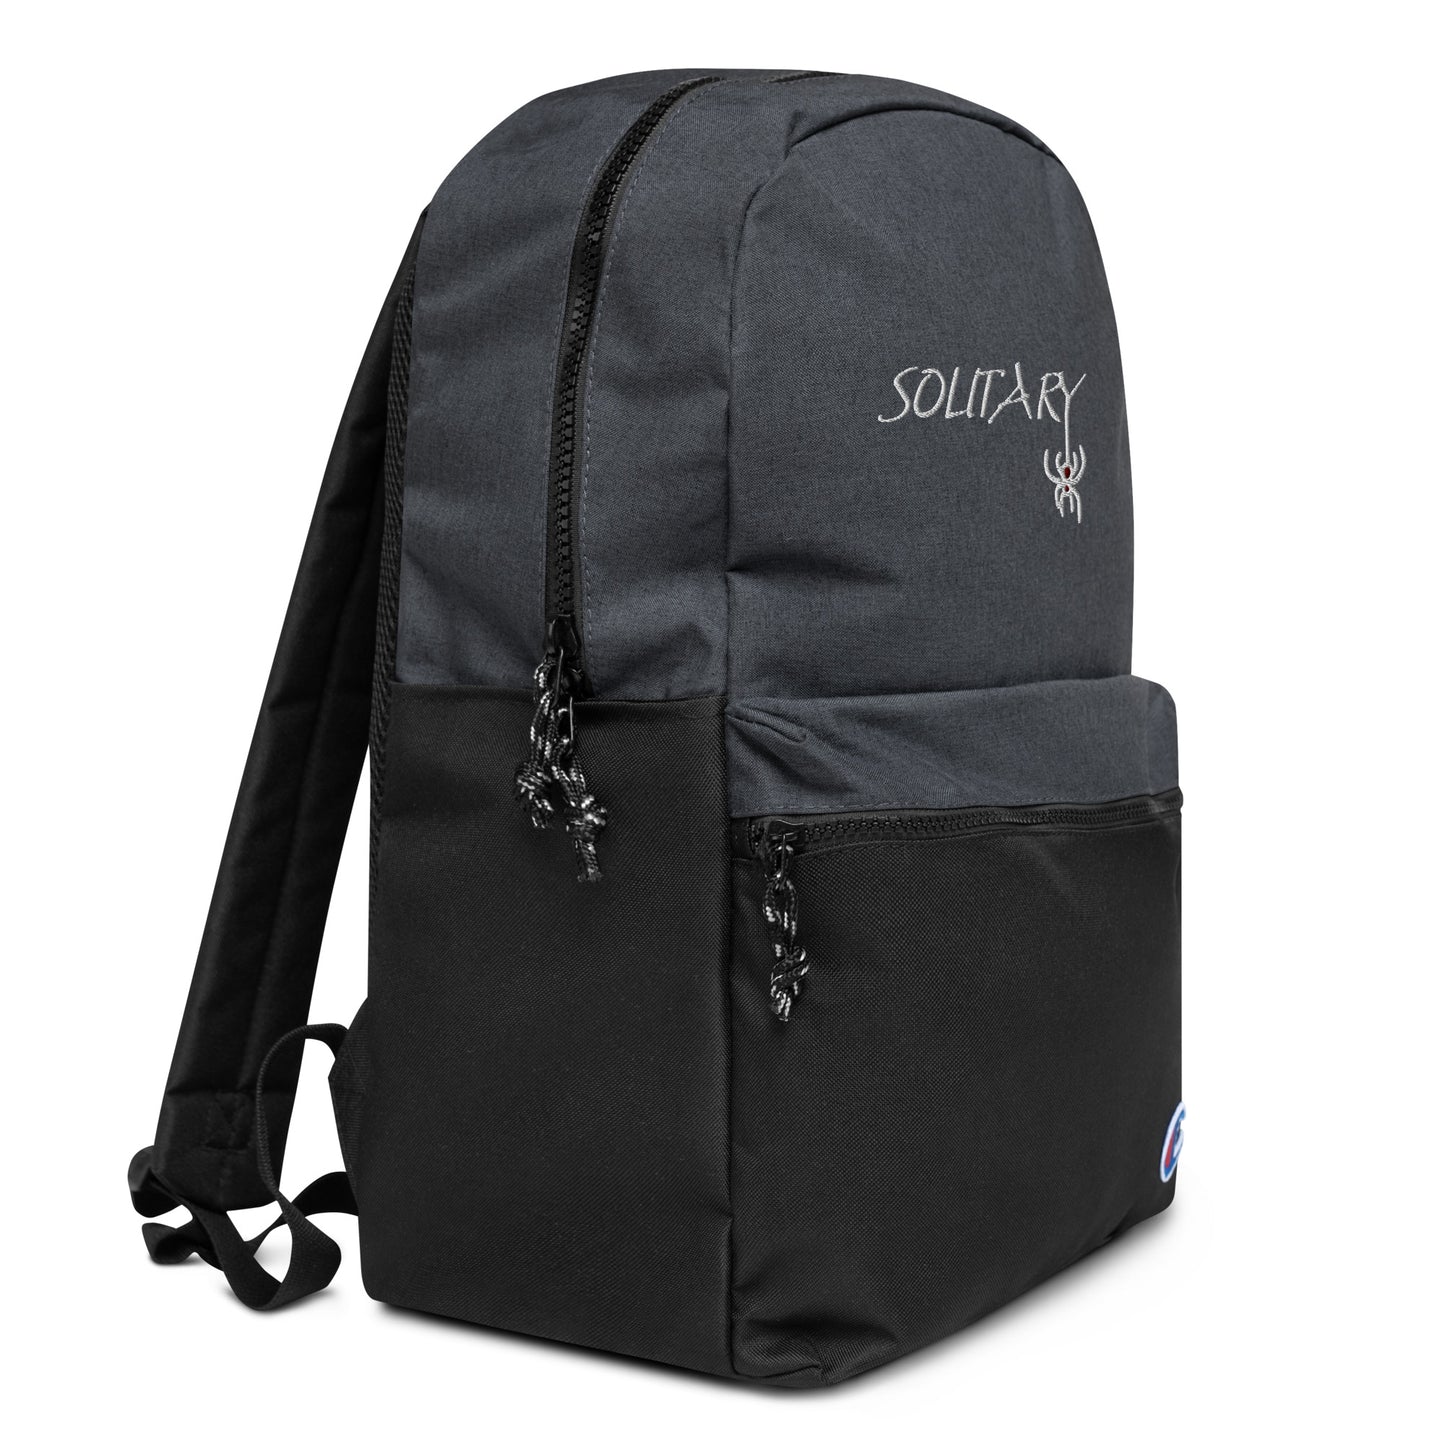 Spyder Solitary Embroidered Champion Backpack